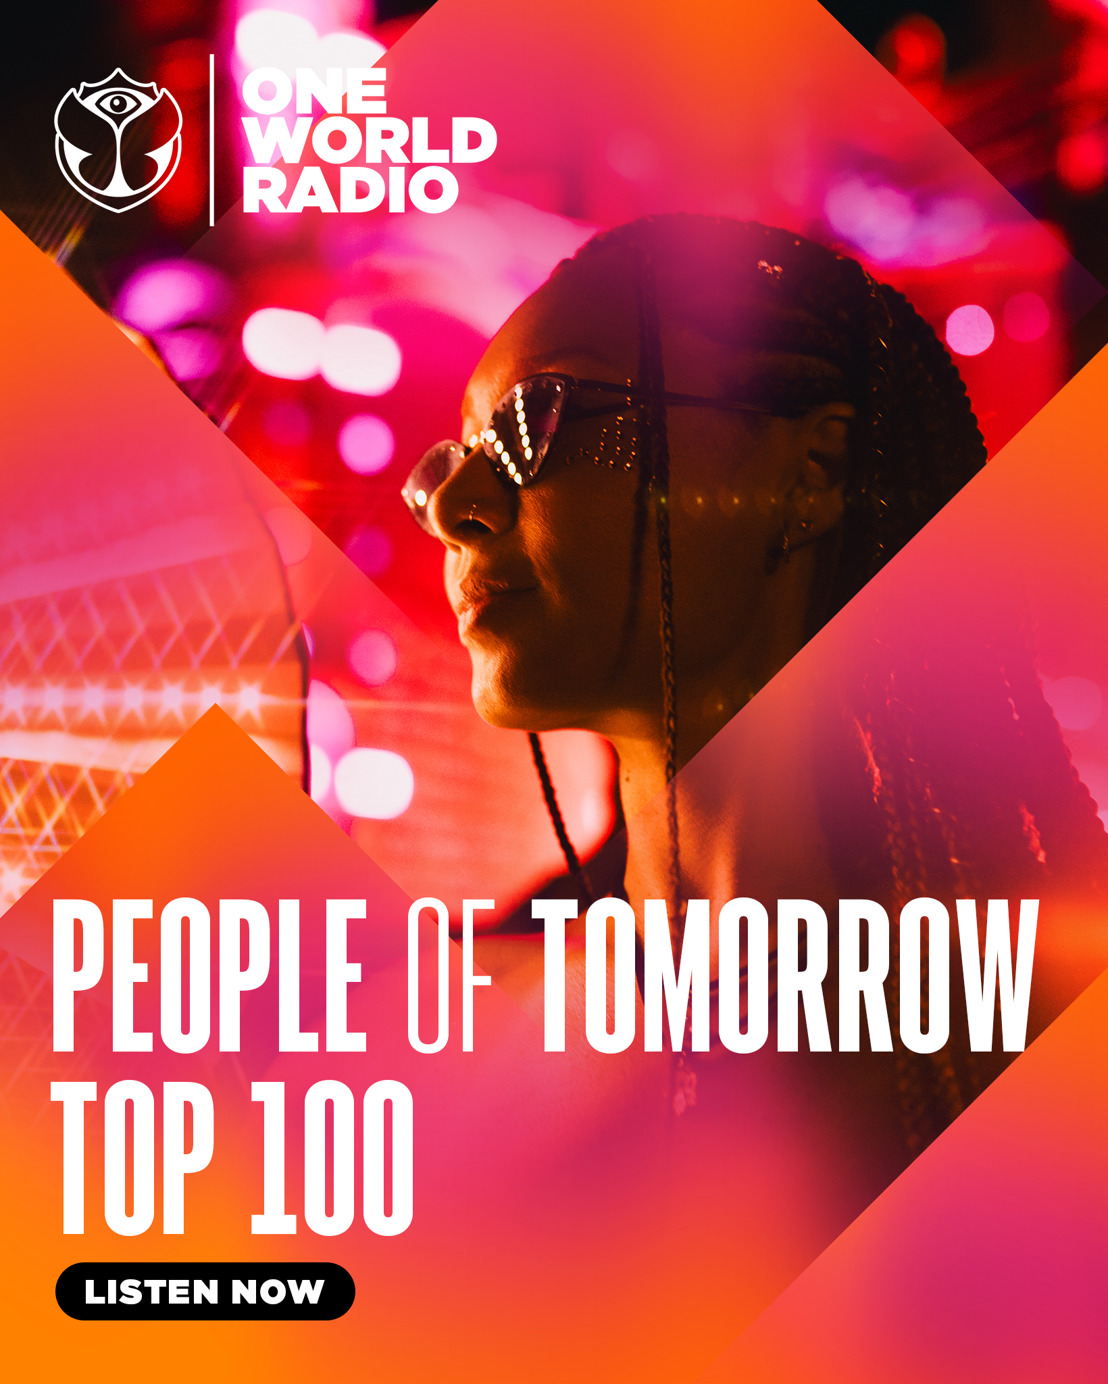 One World Radio launches The People of Tomorrow Top 100